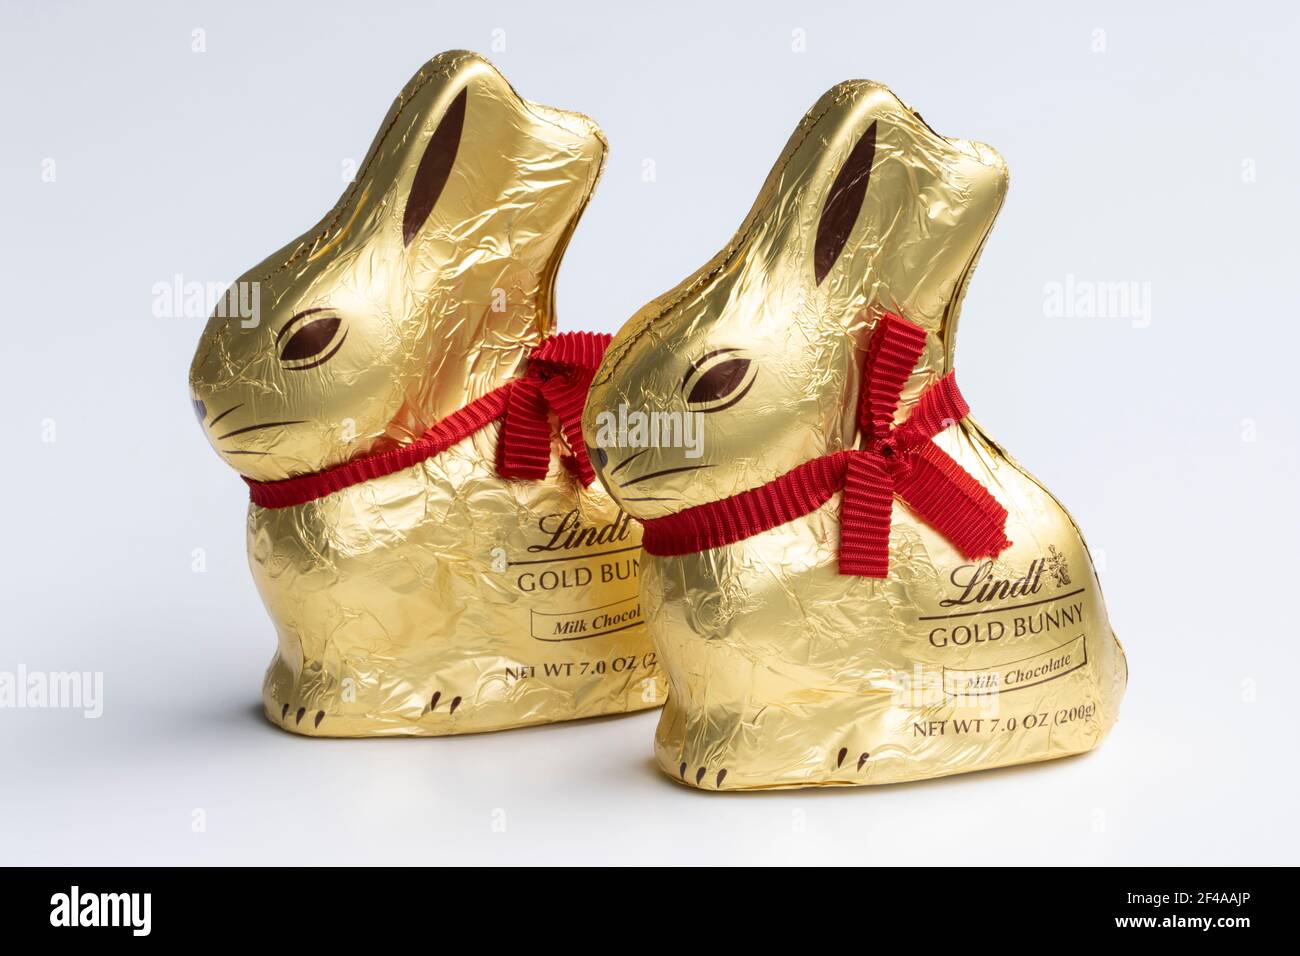 Two Lindt Gold Bunnies isolated on a white background. Milk chocolate Easter bunnies wrapped in golden foil with a red ribbon, produced by Lindt ... Stock Photo